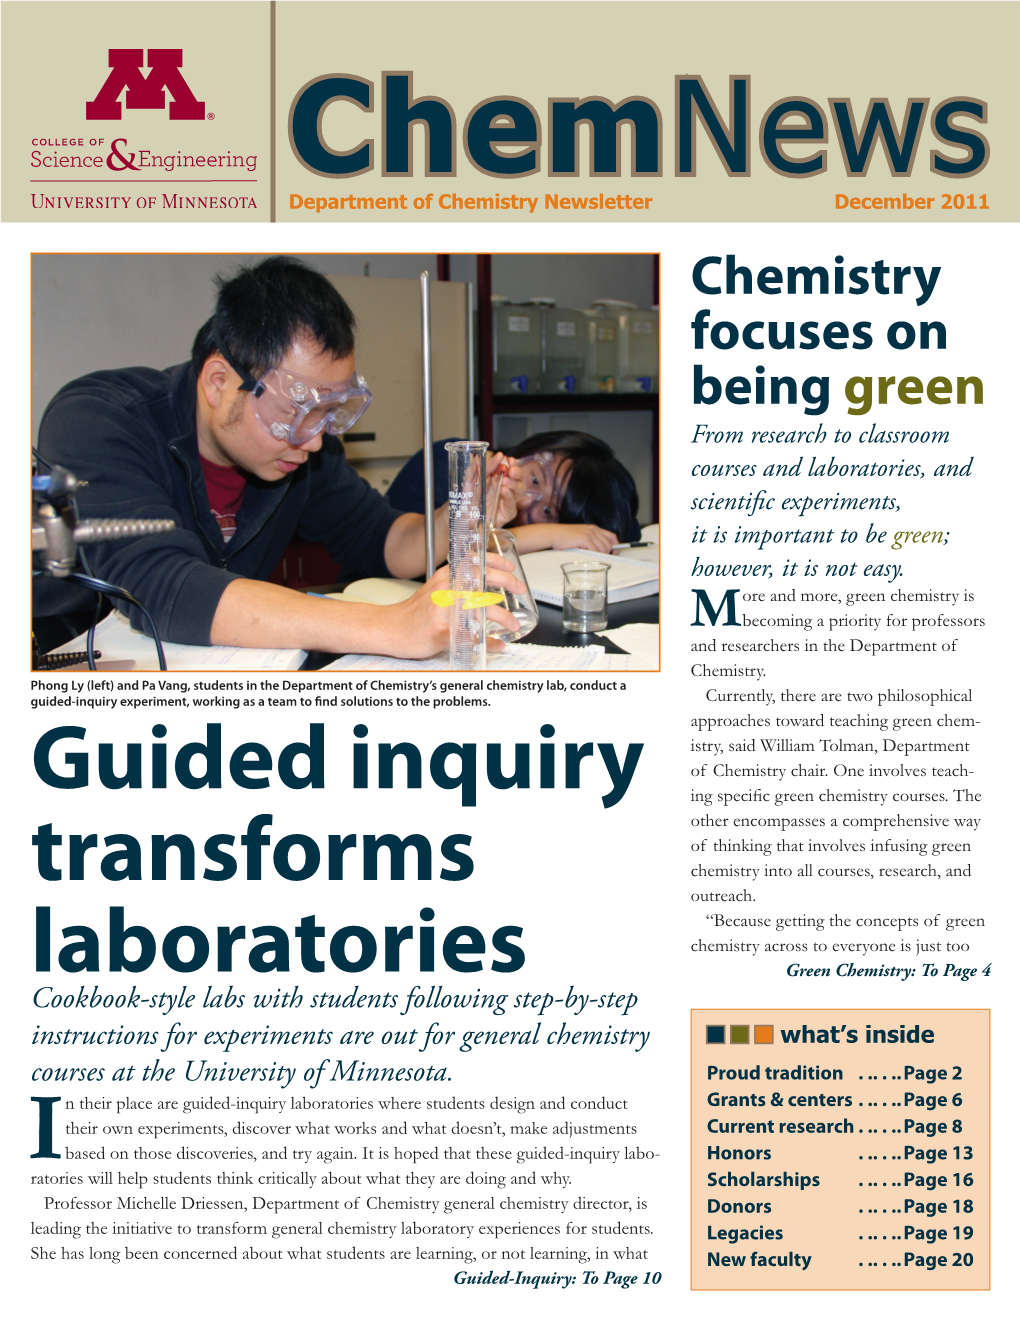 Guided Inquiry Transforms Laboratories